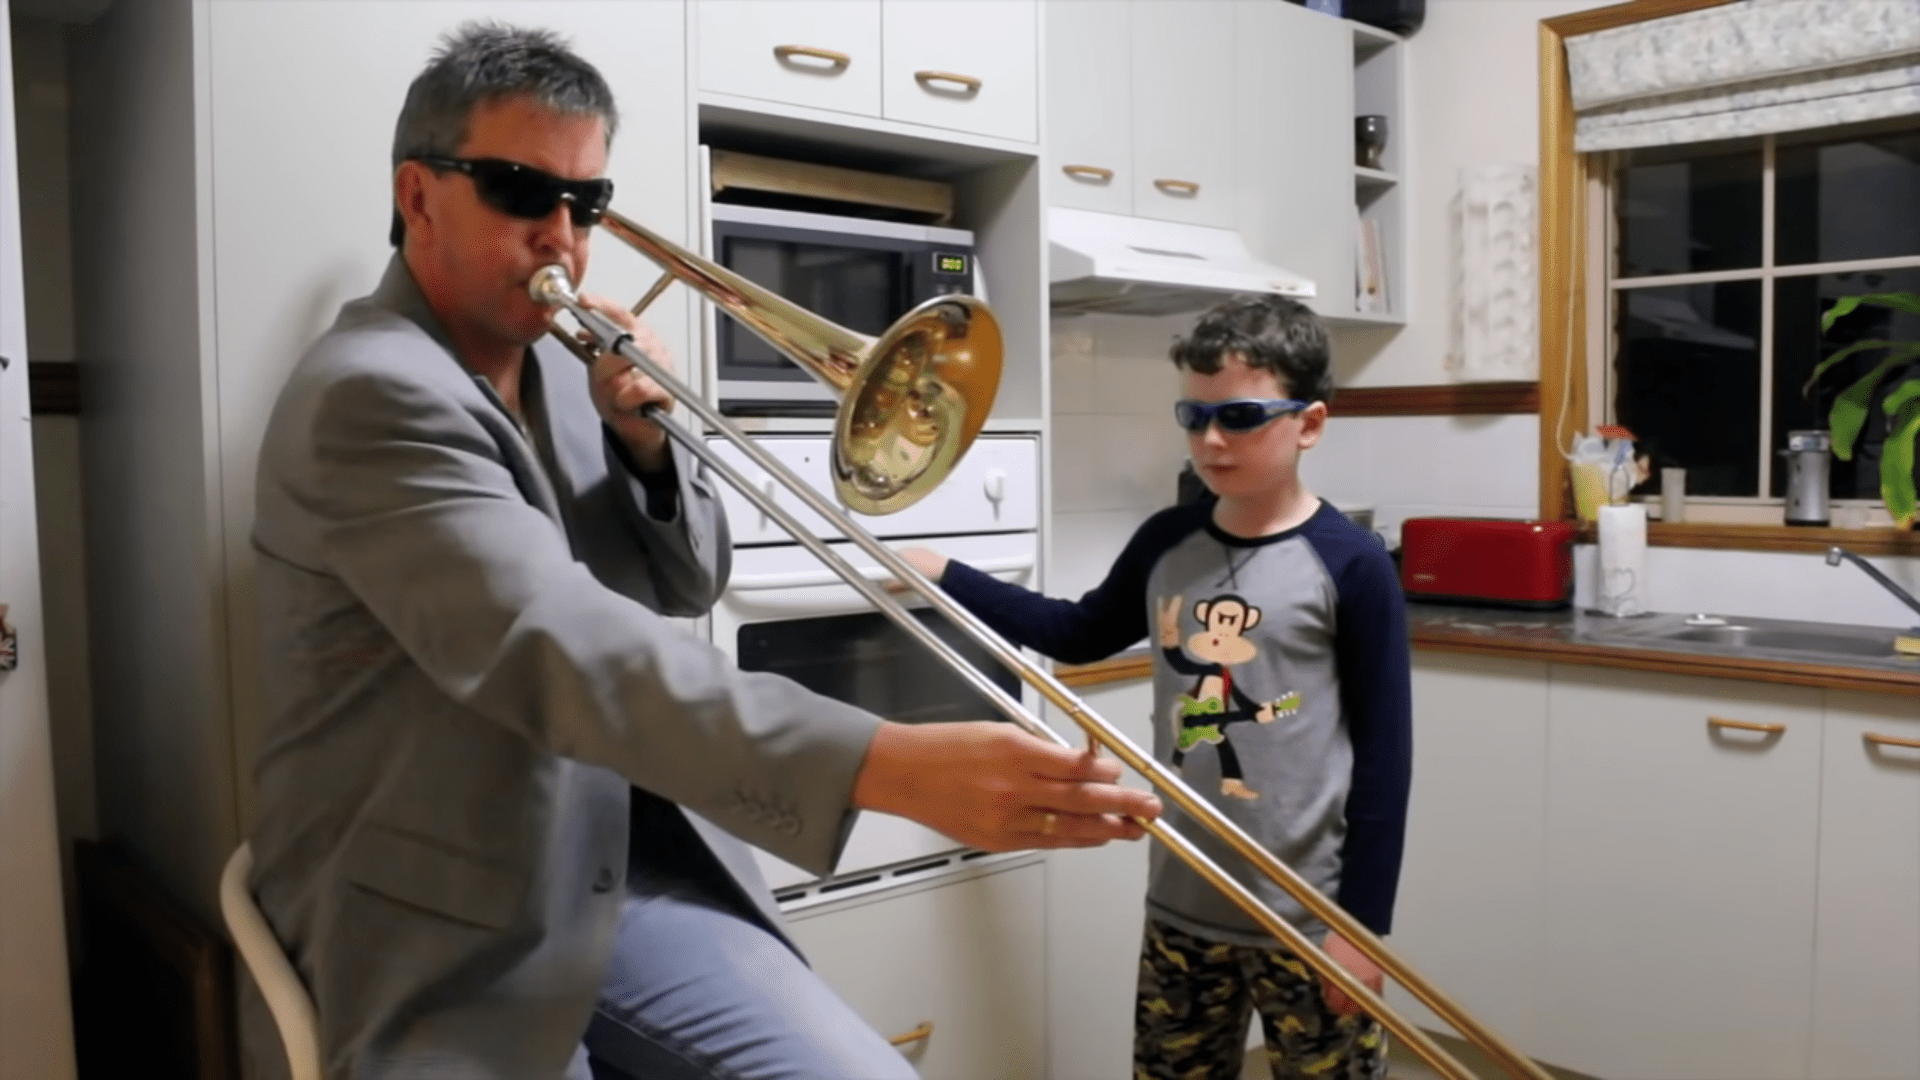 When mom isn't home